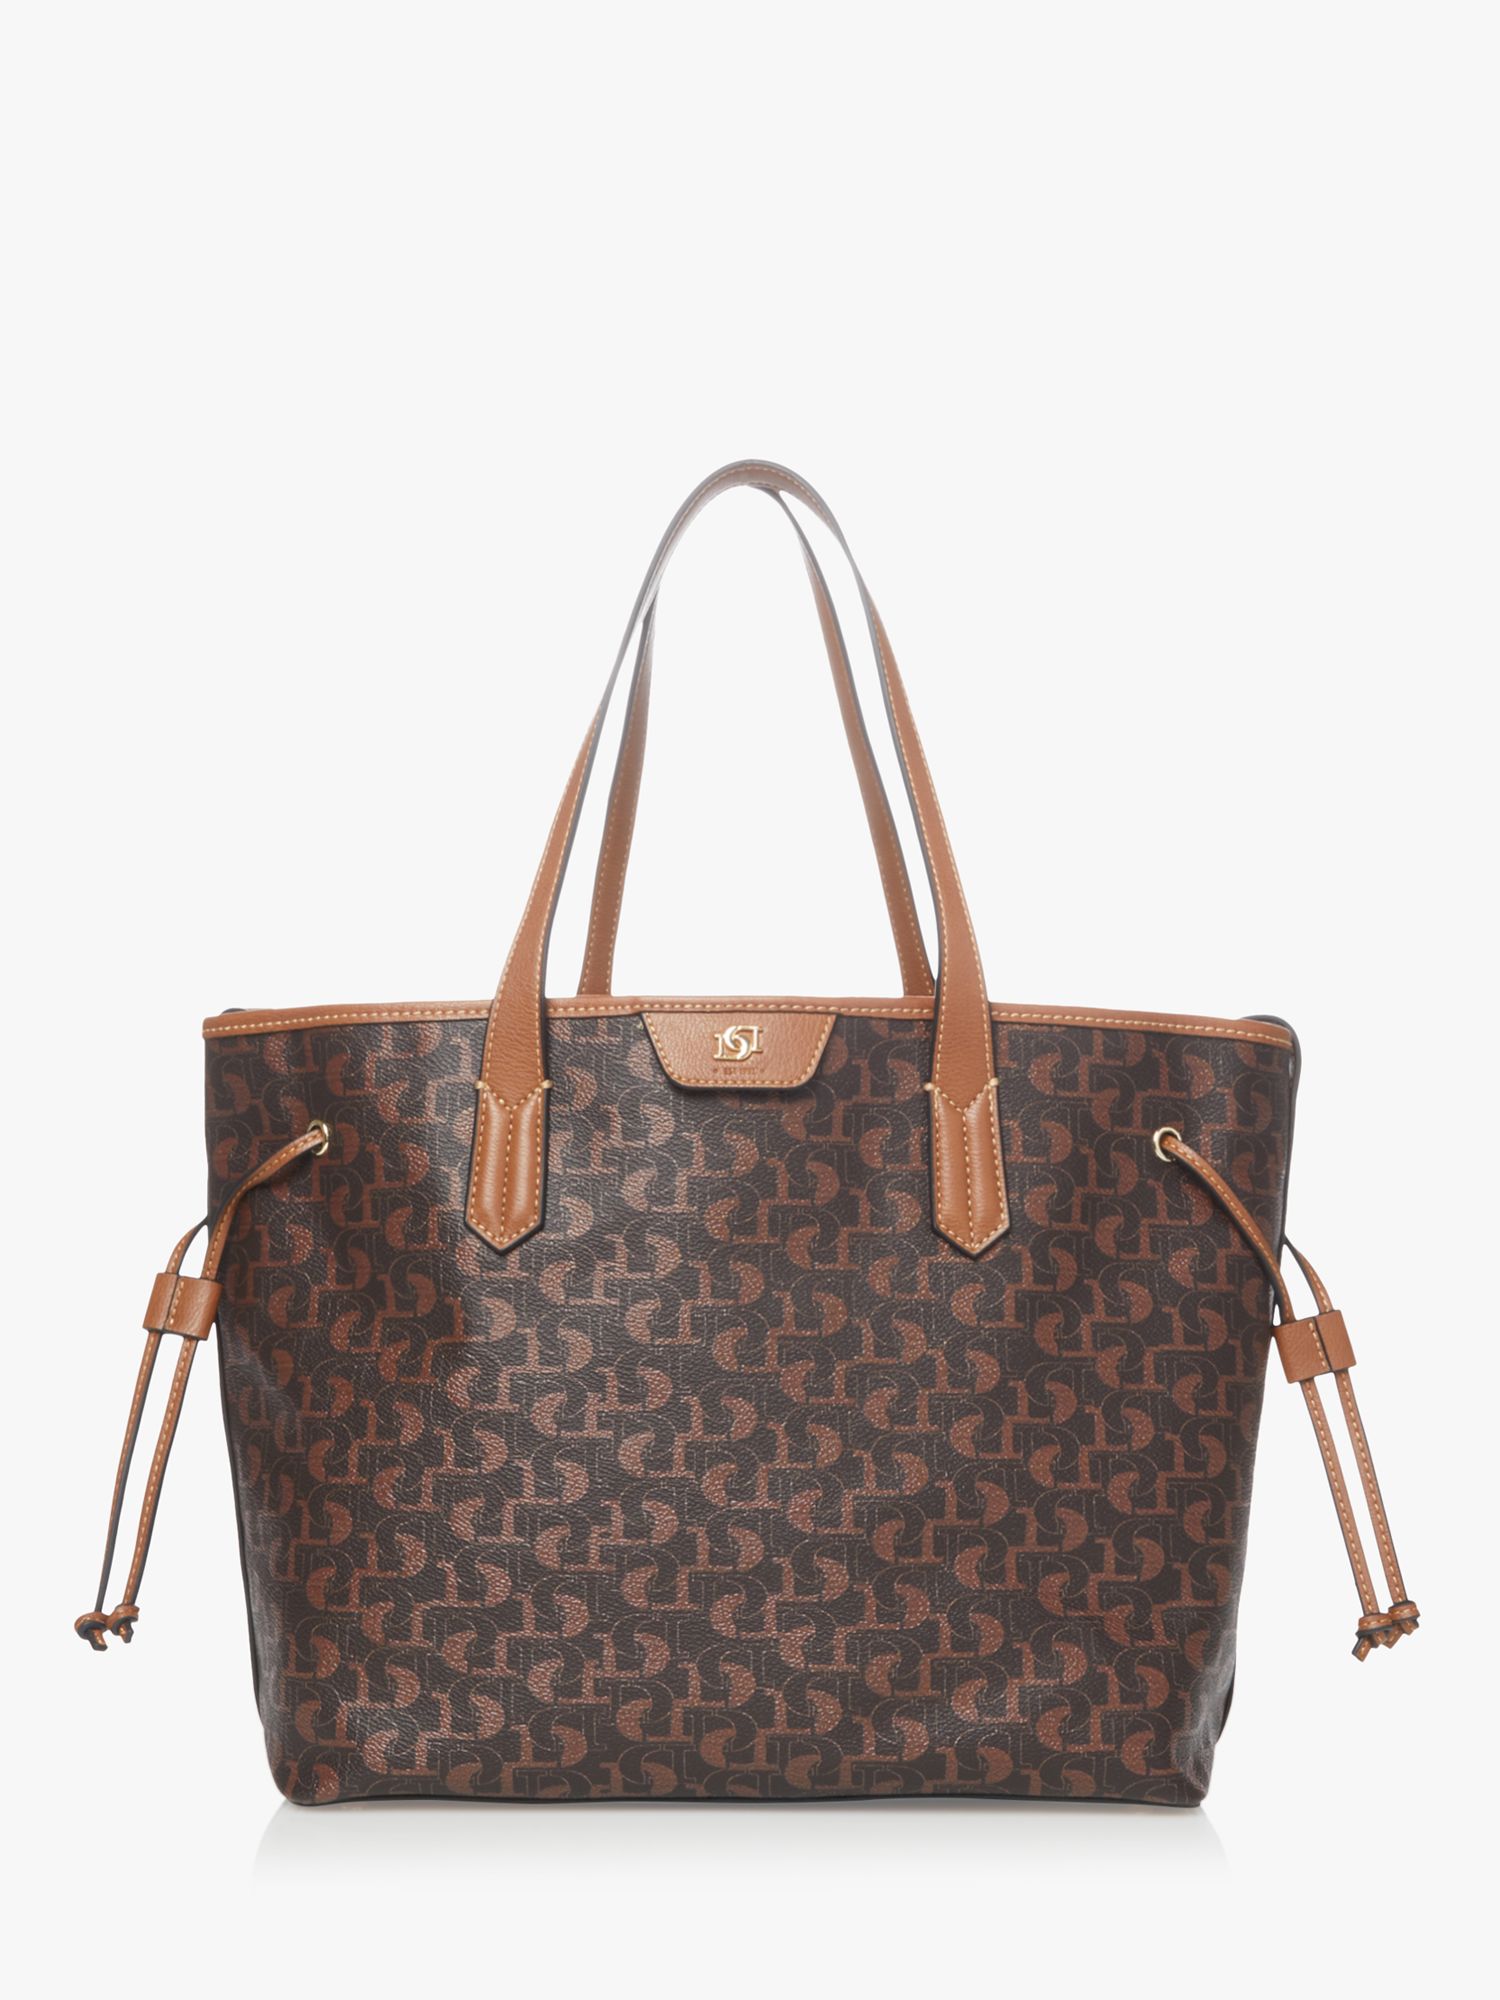 Louis Vuitton Neverfull Cheaper Alternatives inspo! 😵 What budget is